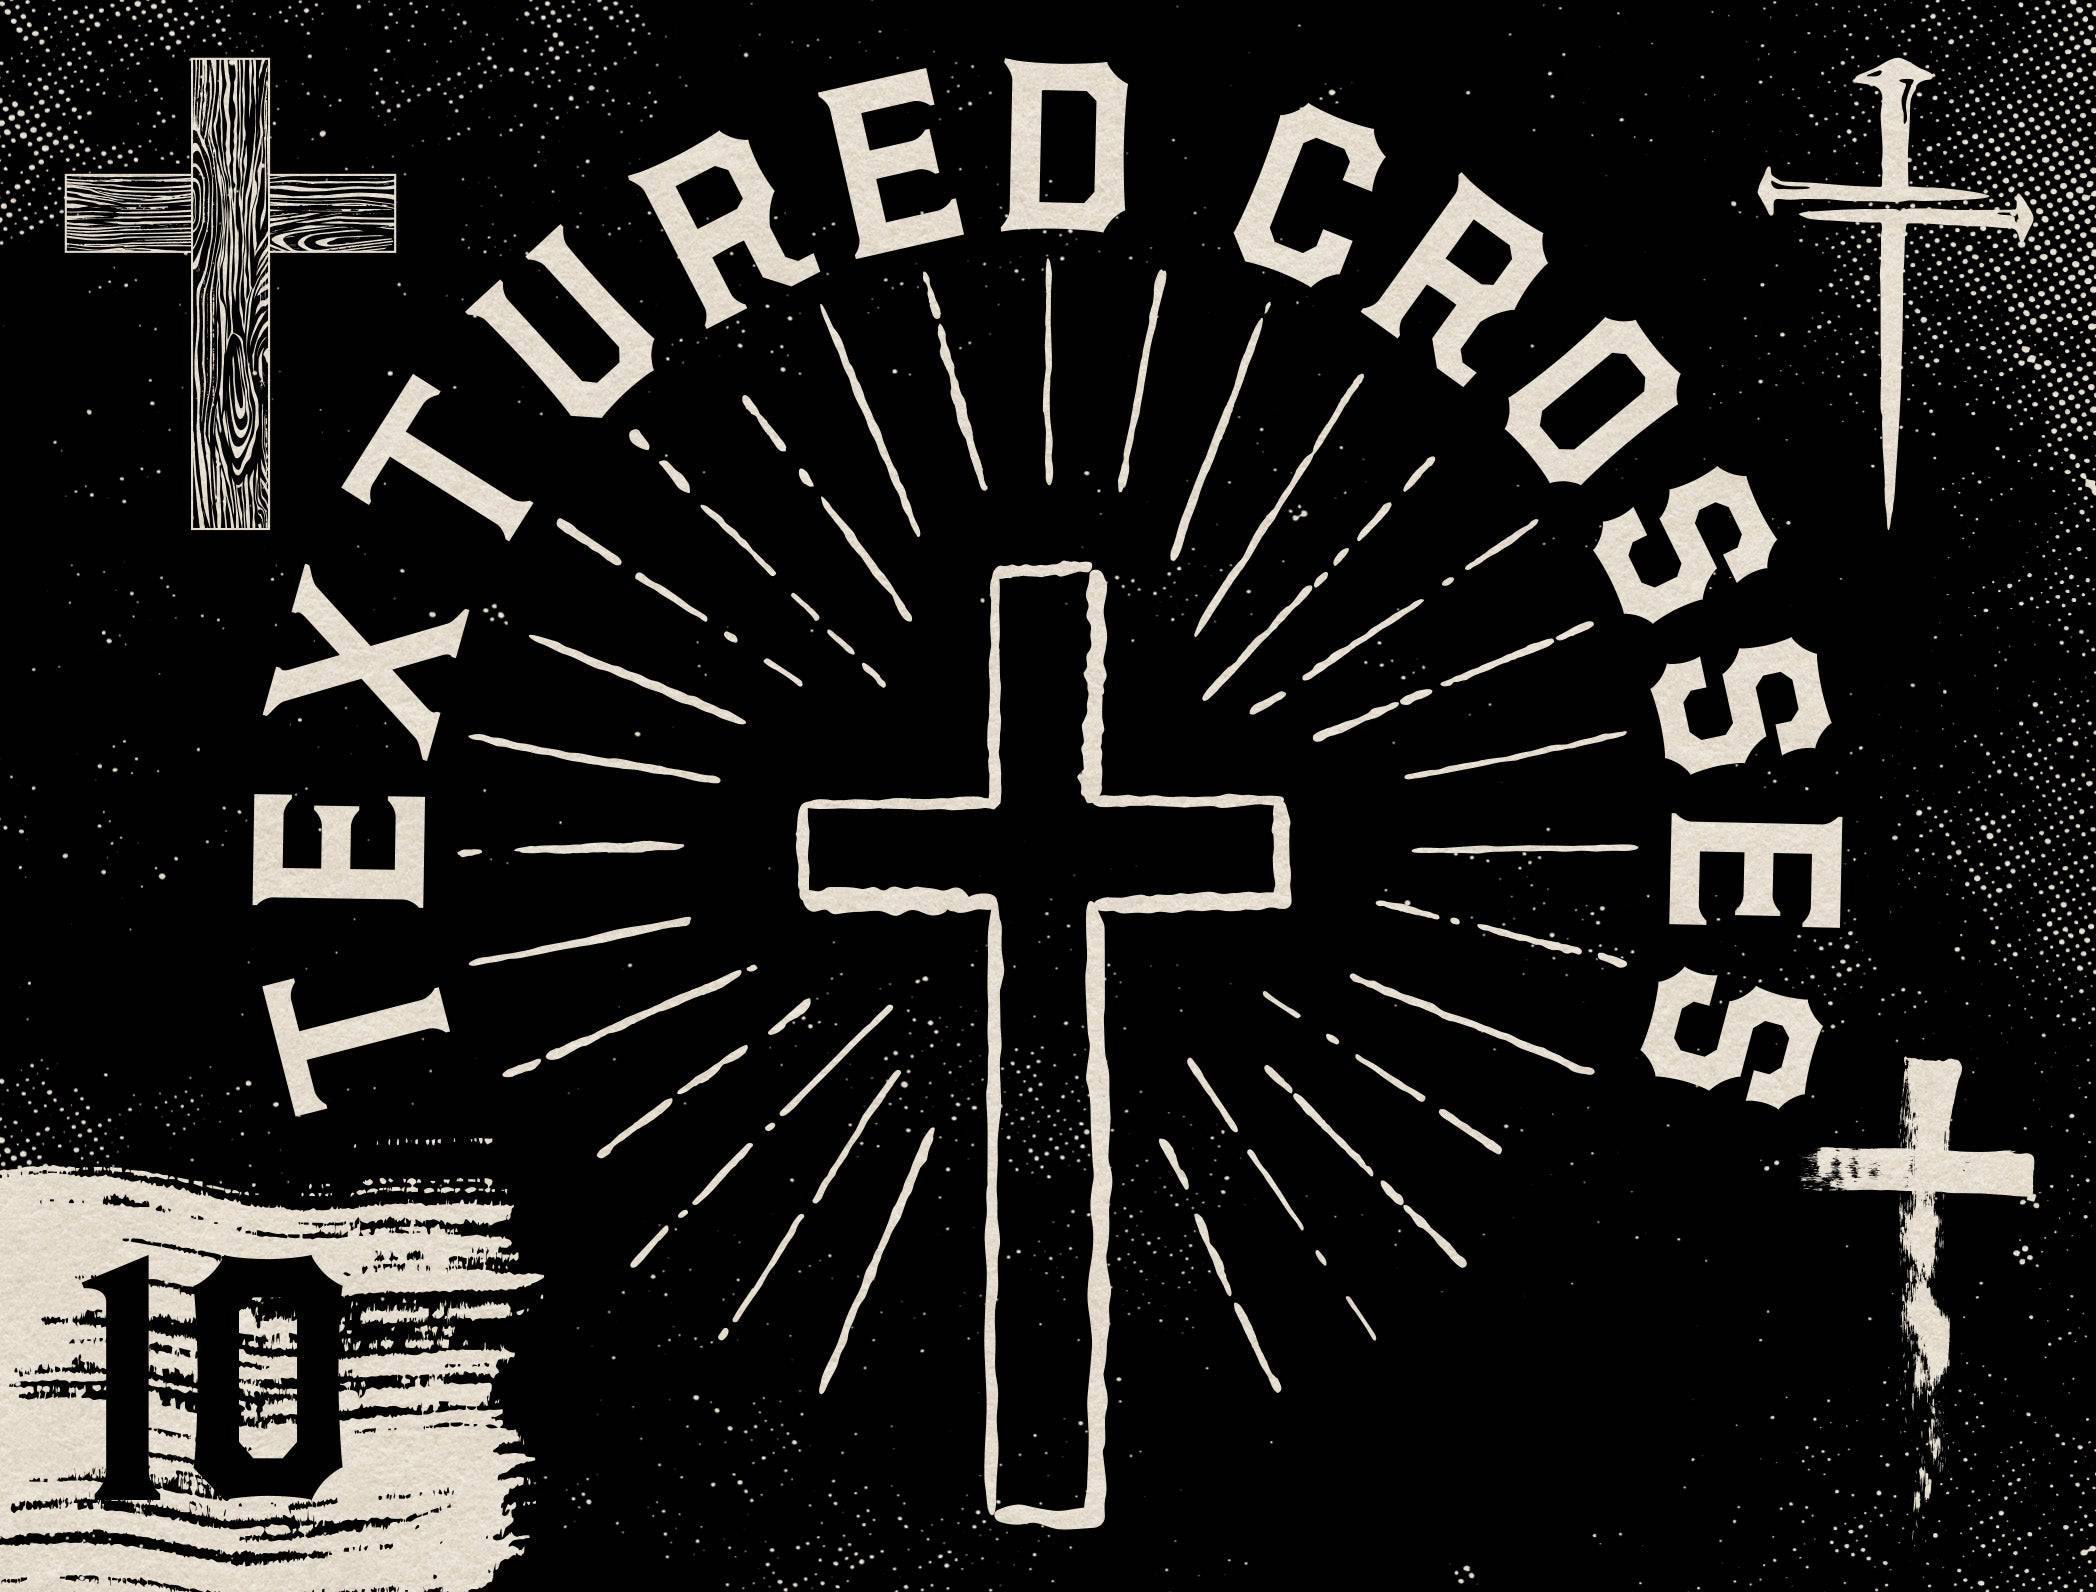 Ultimate Cross Tattoo Guide With 100+ Examples - Tattoo Stylist